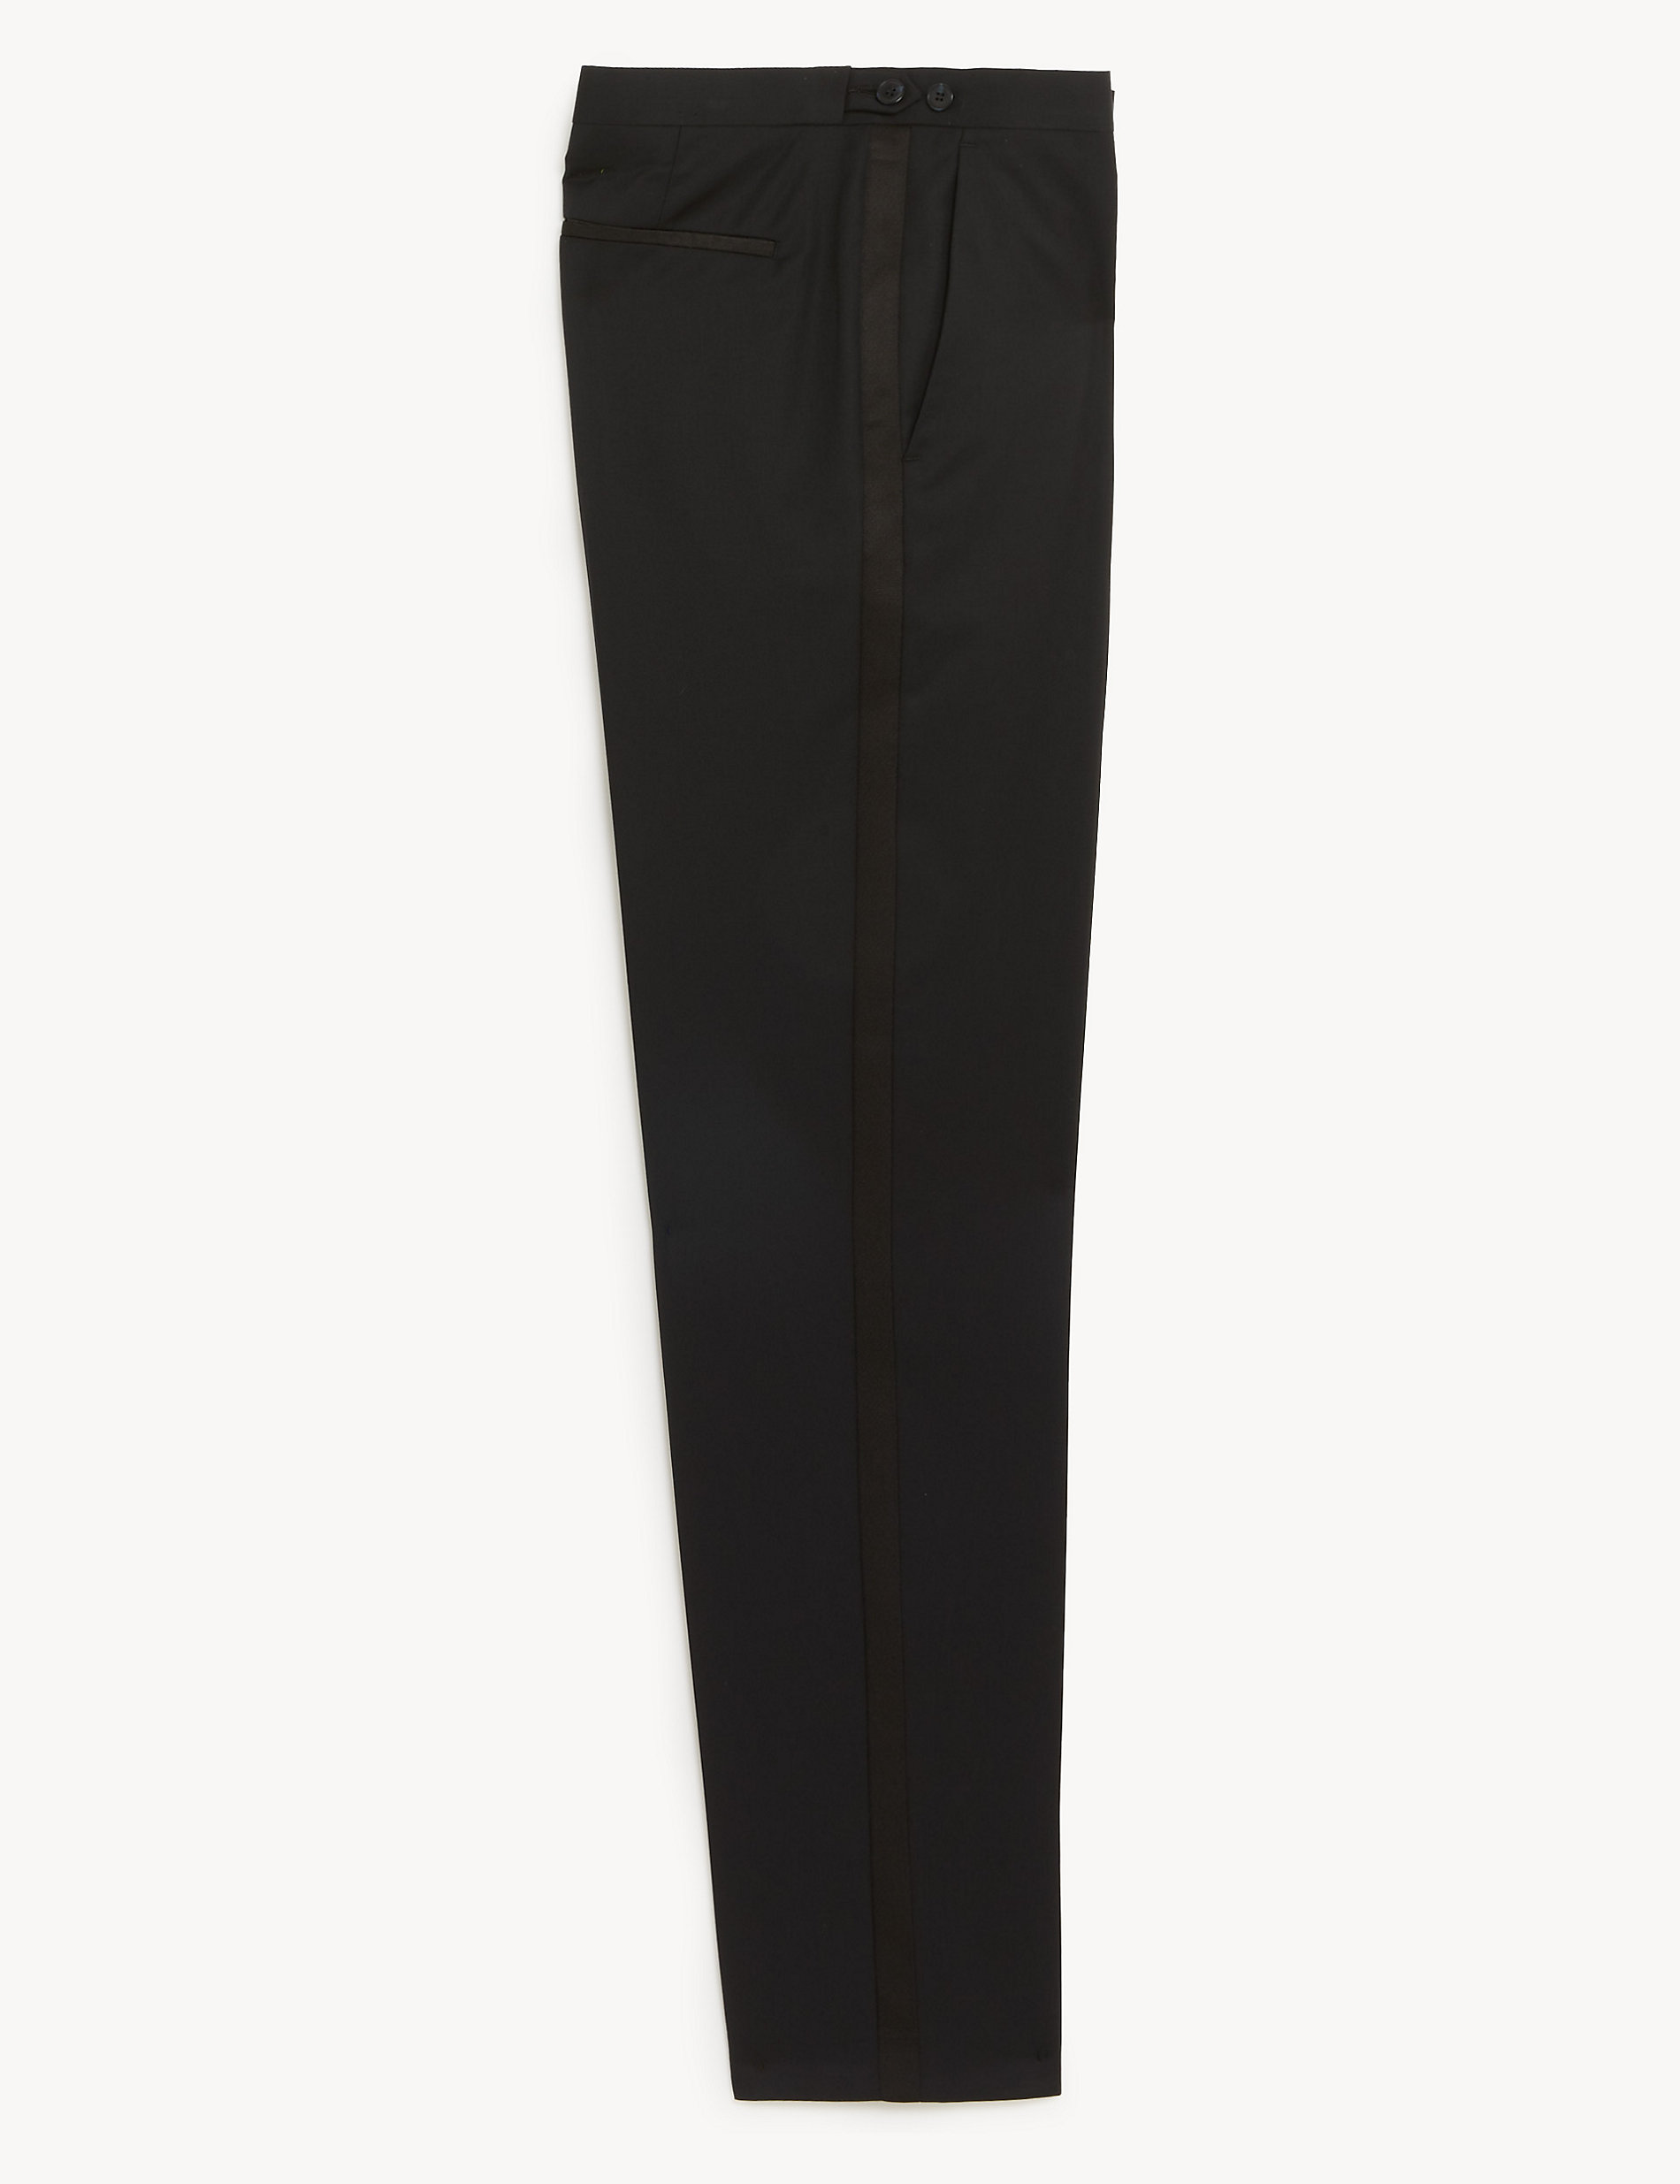 Tailored Fit Wool Blend Trousers